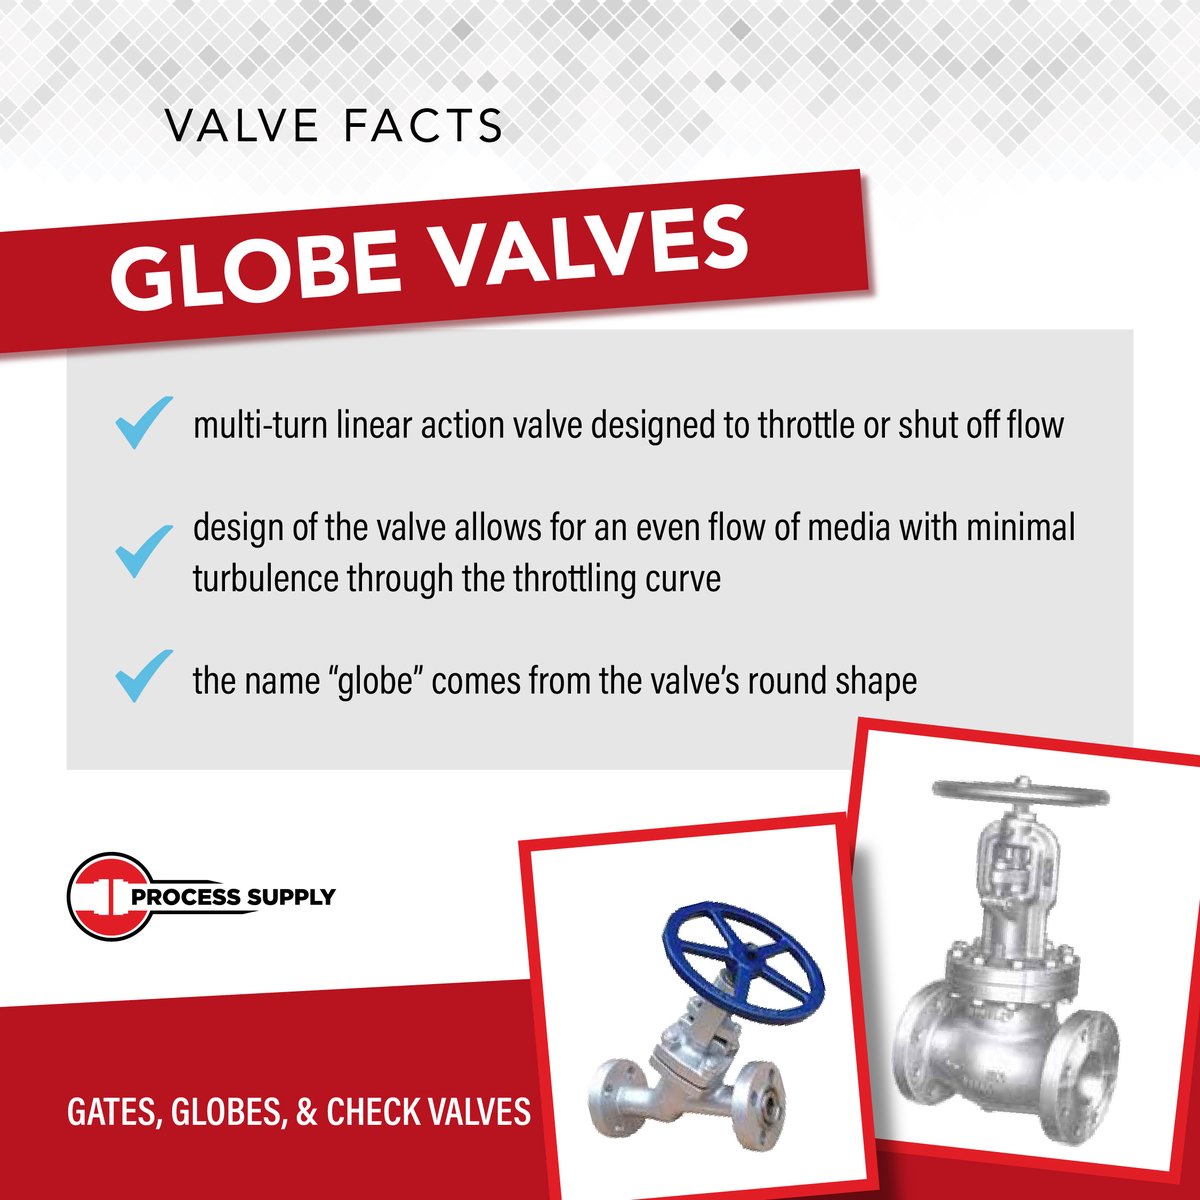 #GlobeValves offer versatile flow control, capable of blocking or allowing fluid passage. Featuring a distinctive round shape, they are comprised of two body halves divided by an internal baffle. Learn more about their functionality: ow.ly/KH1Y50R7X0G
#industrialsupply